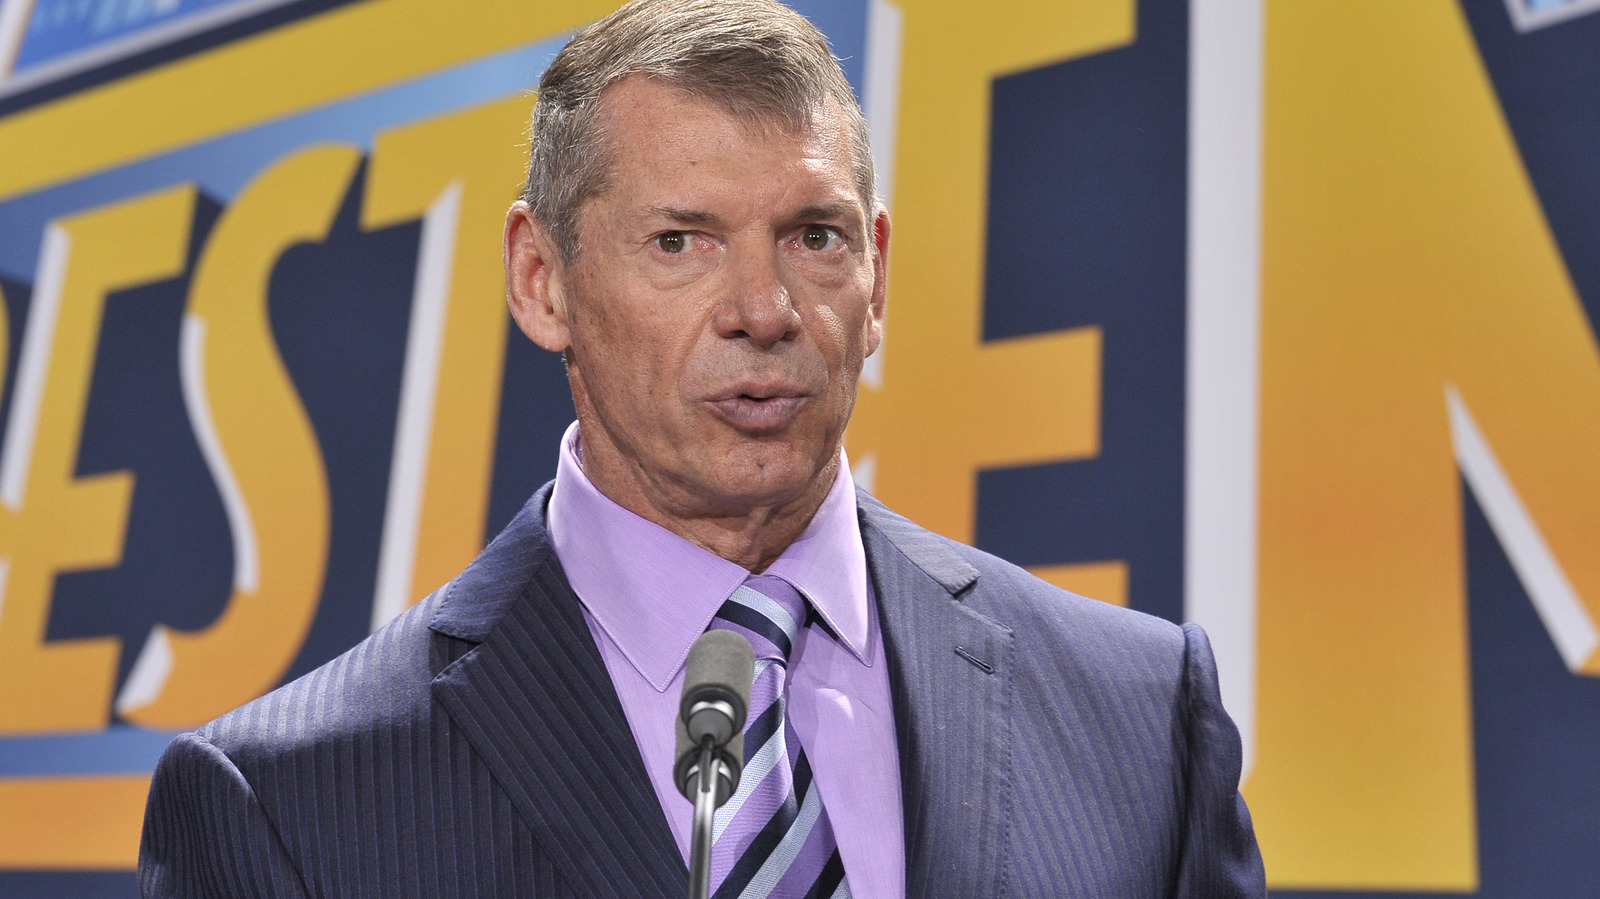 TKO Lists Vince McMahon Board Membership As Potential Financial Risk In New SEC Filing